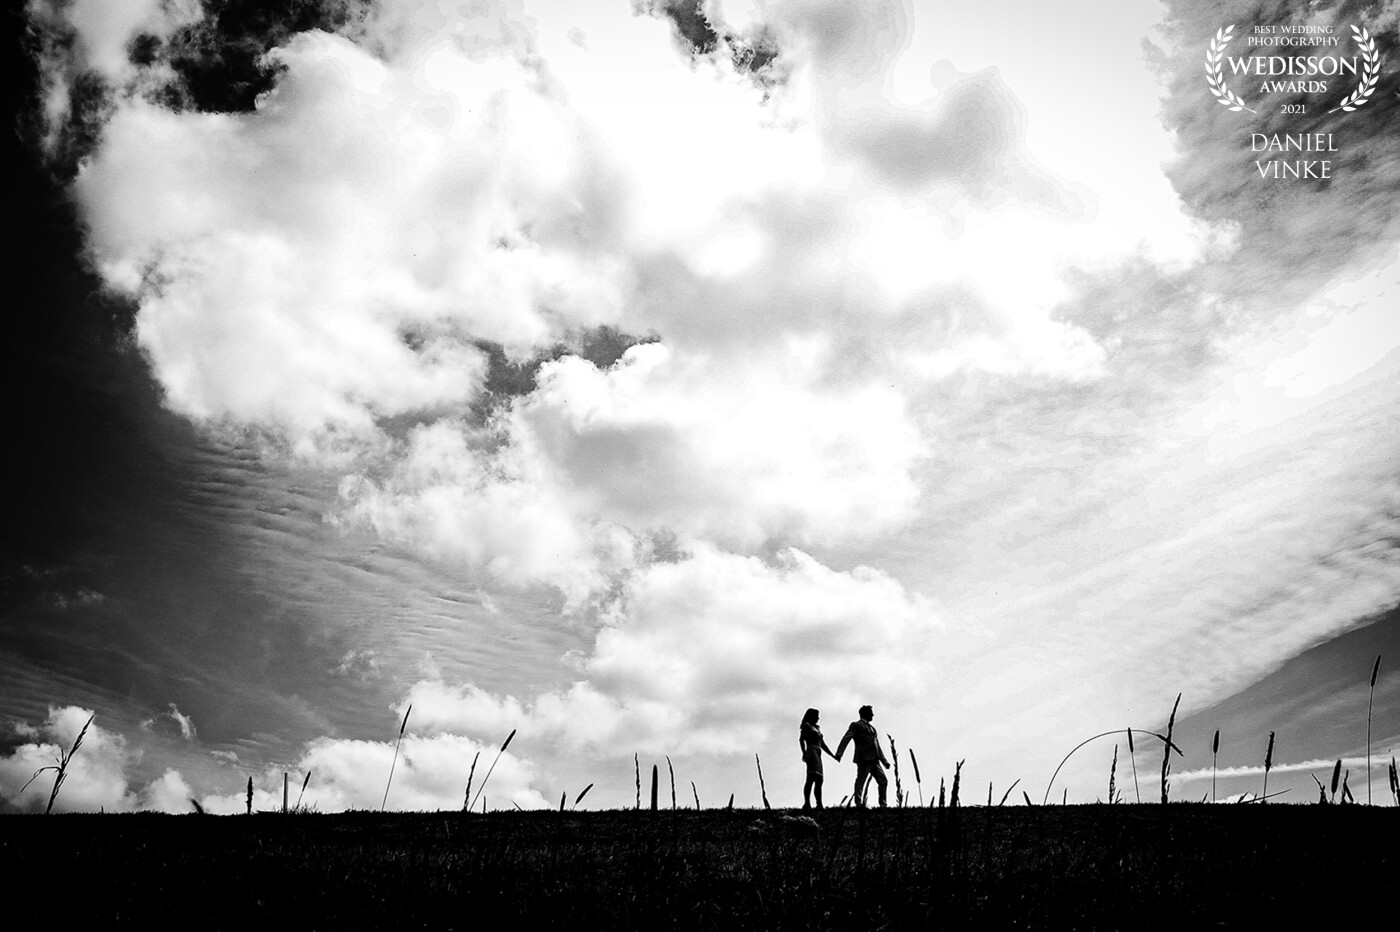 Great clouds in the sky and this hill made a perfect opportunity for some nice silhouettes! This couple walked on the hill and I waited for them to be between some high grass.